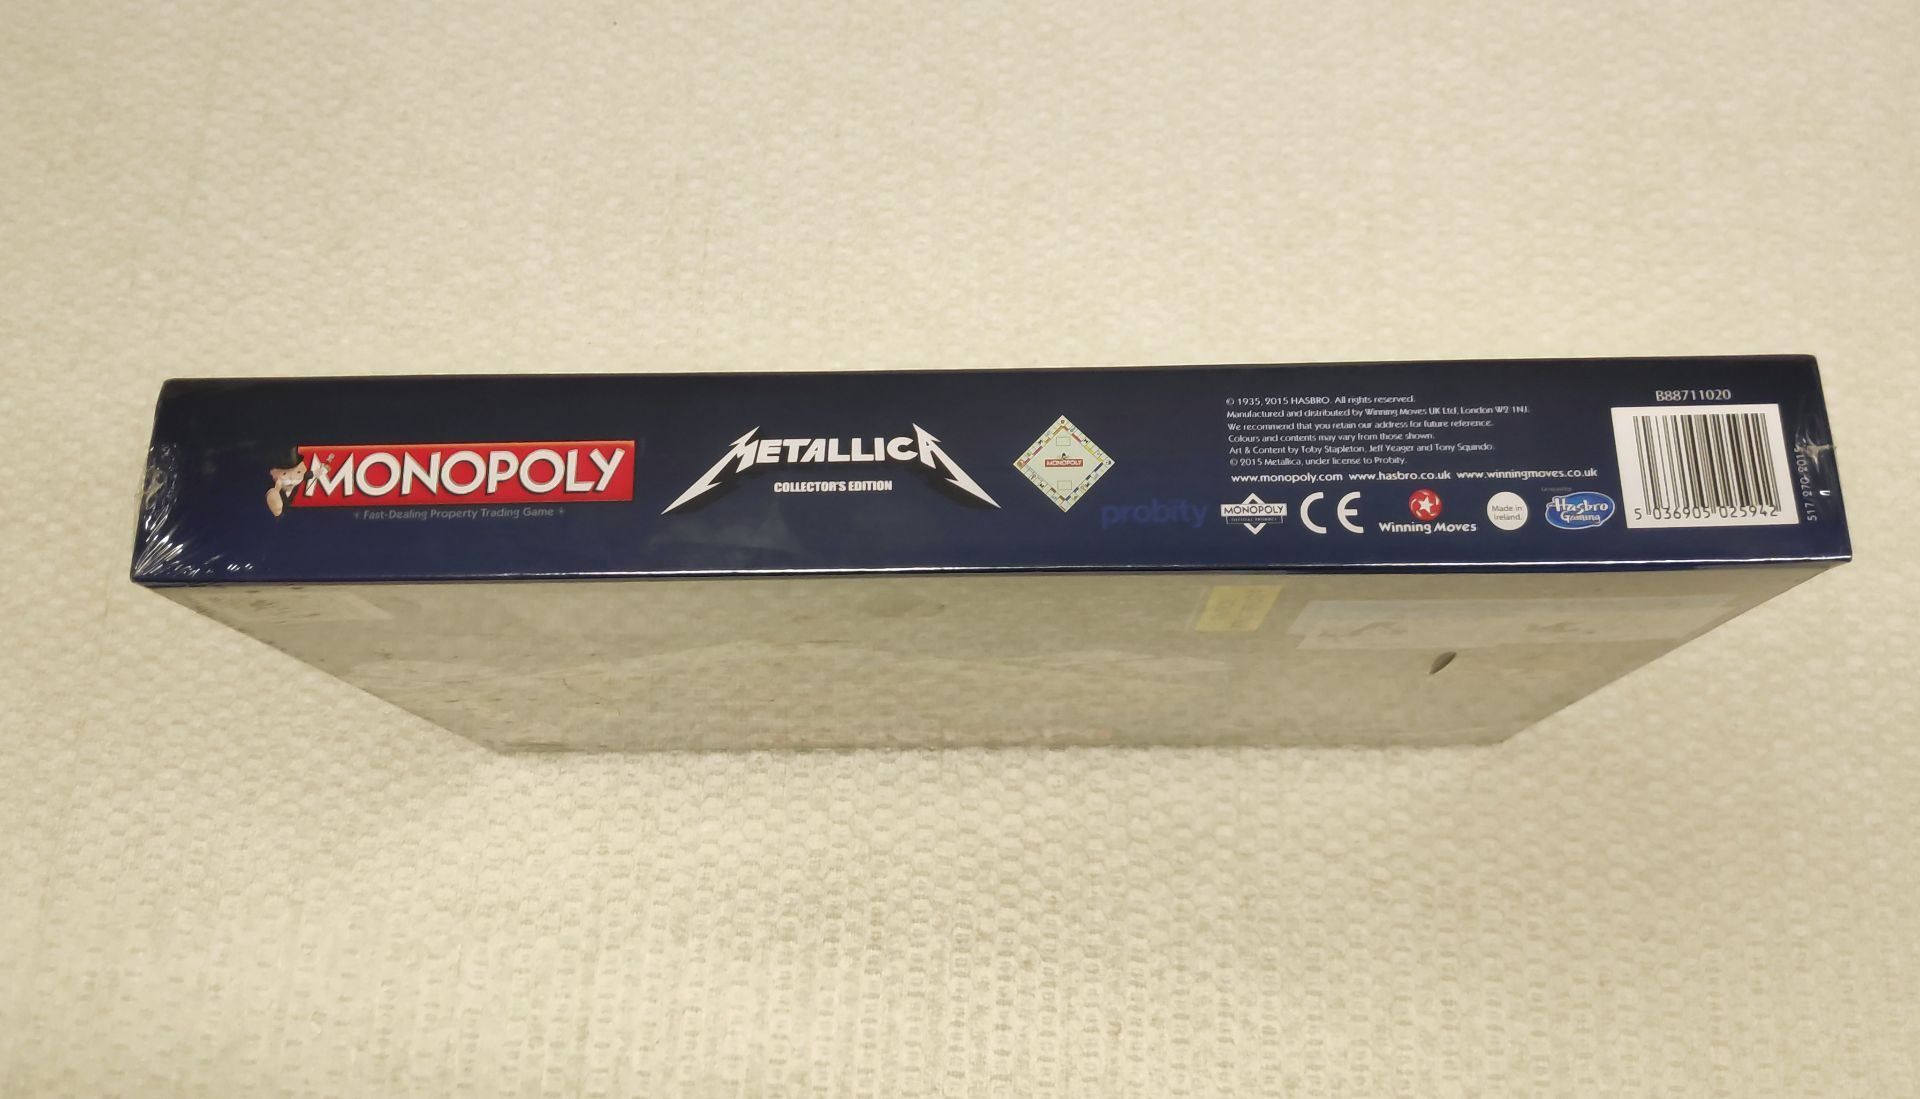 1 x Metallica Collector's Edition Monopoly - New/Sealed - HTYS170 - CL720 - Location: Altrincham WA1 - Image 6 of 8